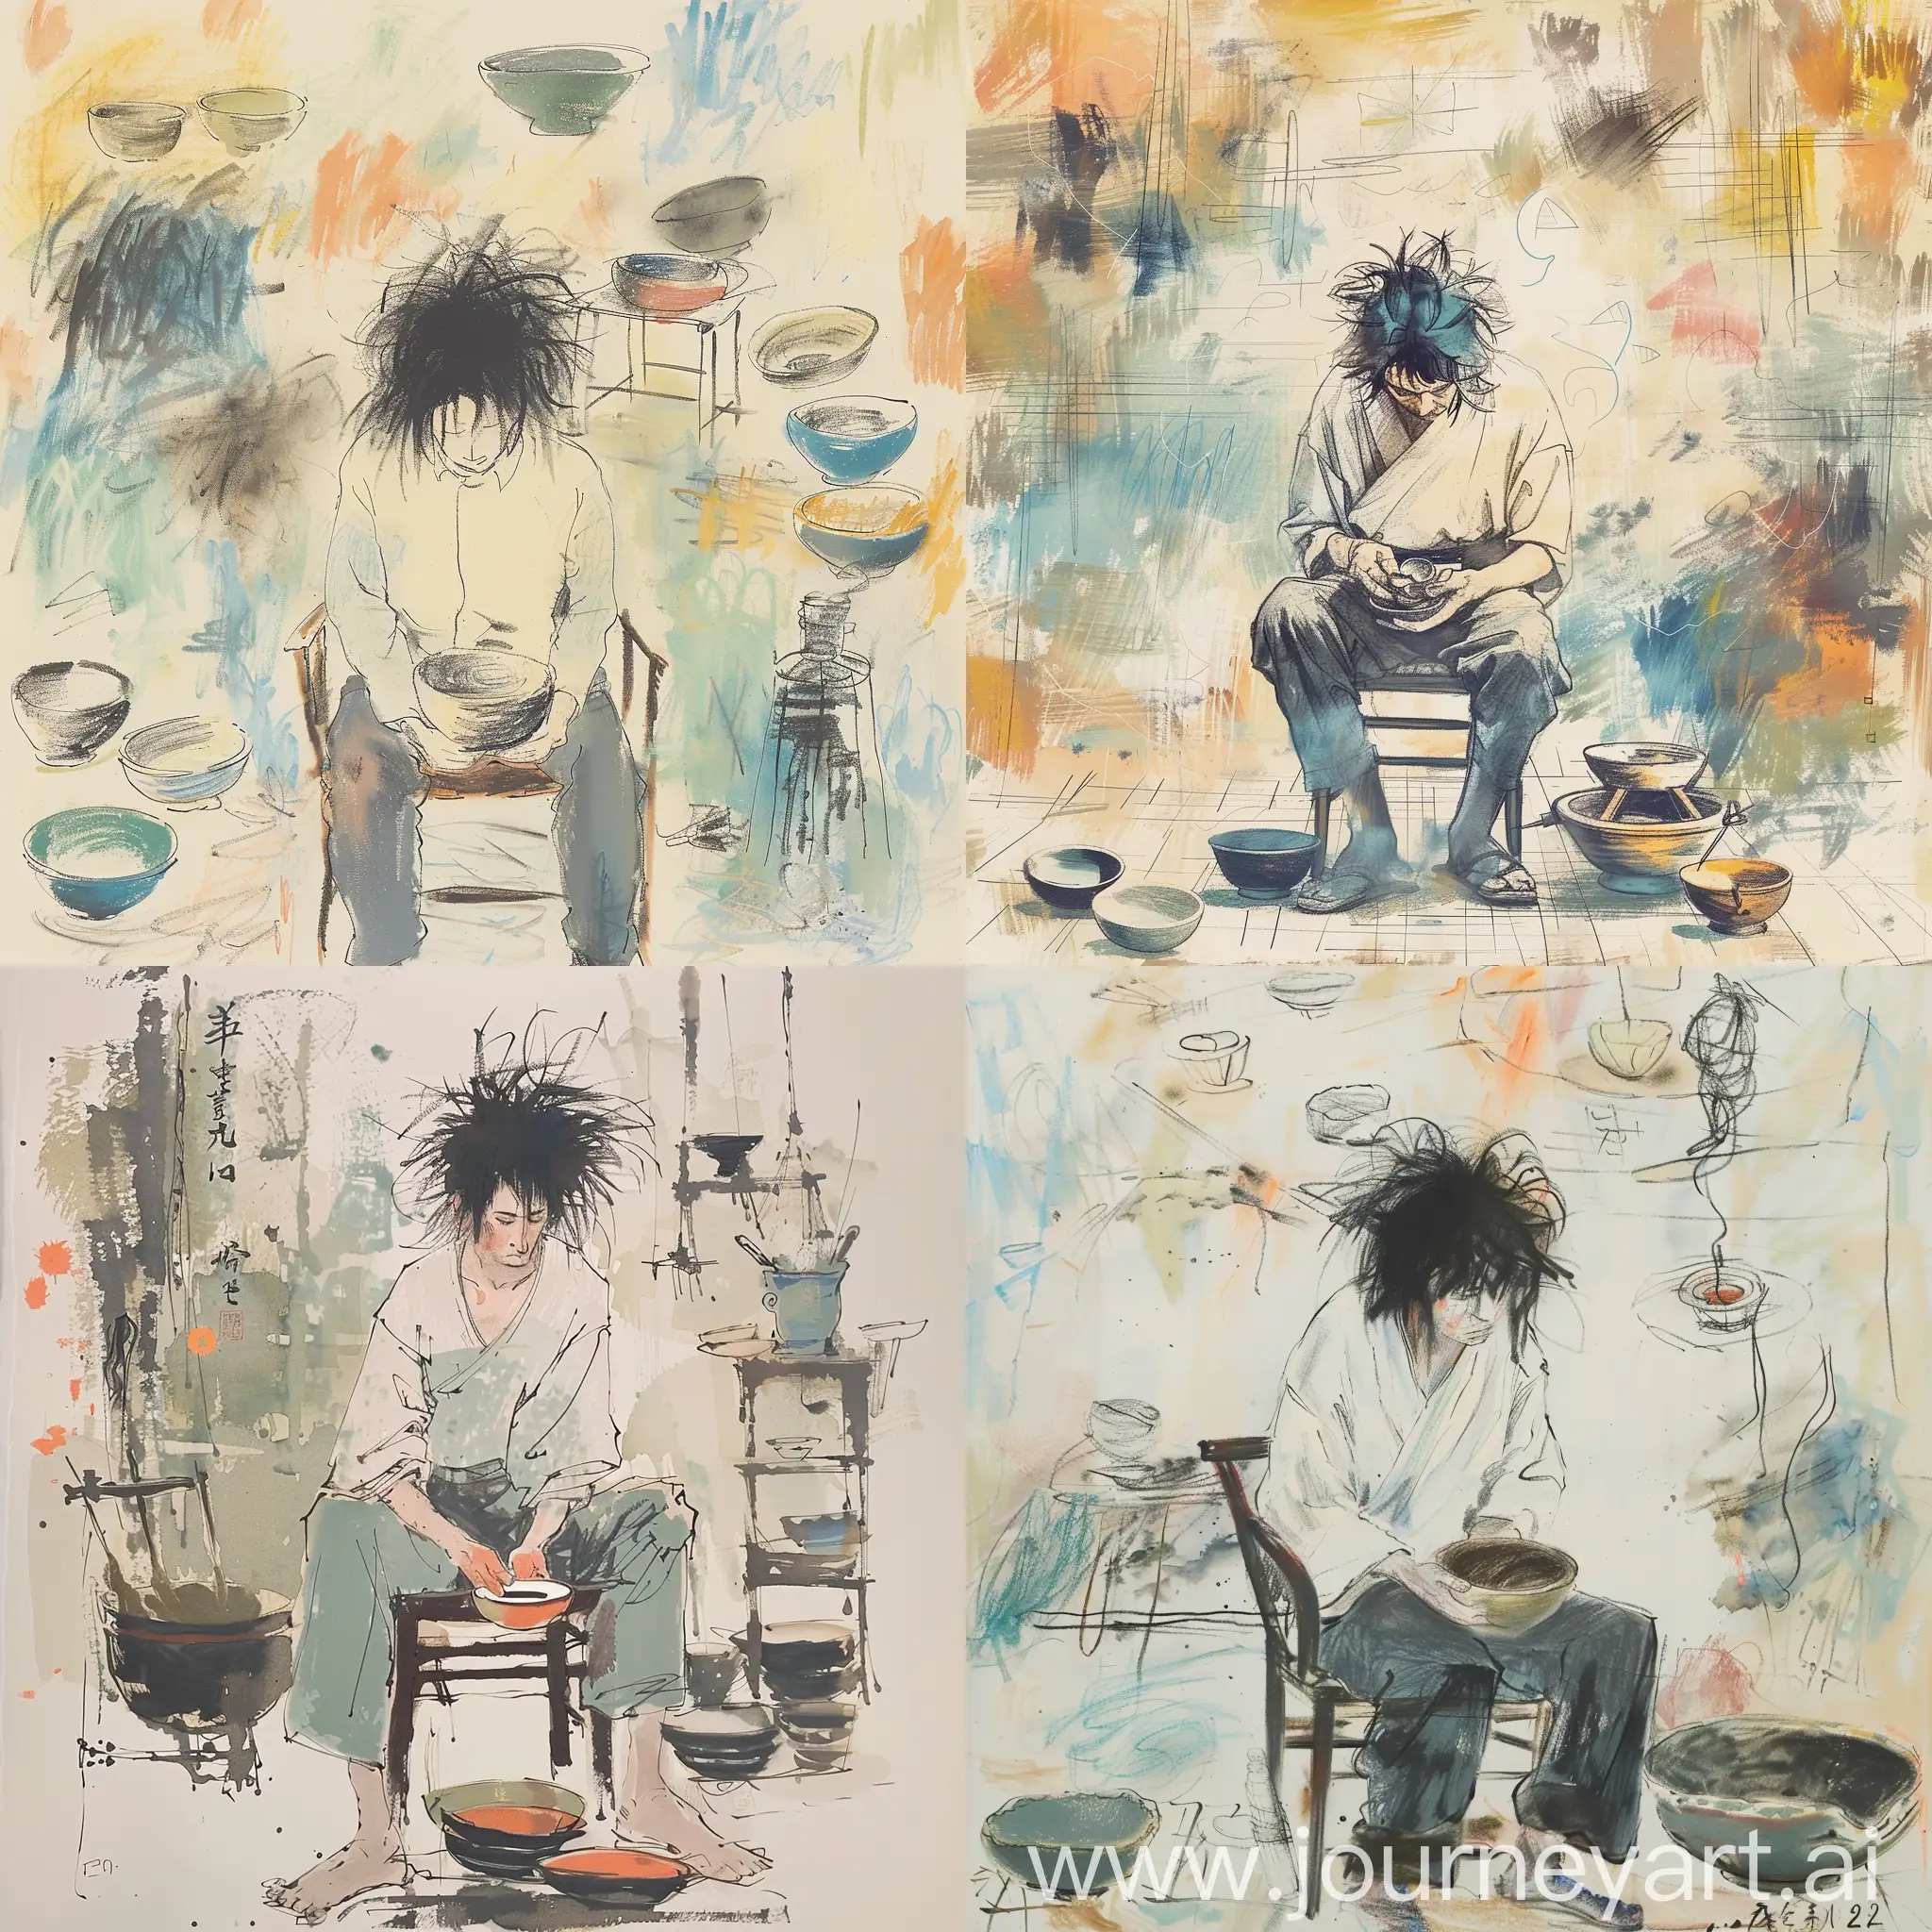 Artist type sketch of a disheveled hair potter in soft pastel colors, ((Japanese male)), ((Japanese male)) seated on a chair, engrossed in making bowls. (Charcoal) (brazier) and bowl works, various bowl shapes are arranged stylistically. The background is a peaceful scene of creative expression in various oils and watercolors in the style of Matisse. Simple lines and flat colors, illustration, simplicity, Y2K